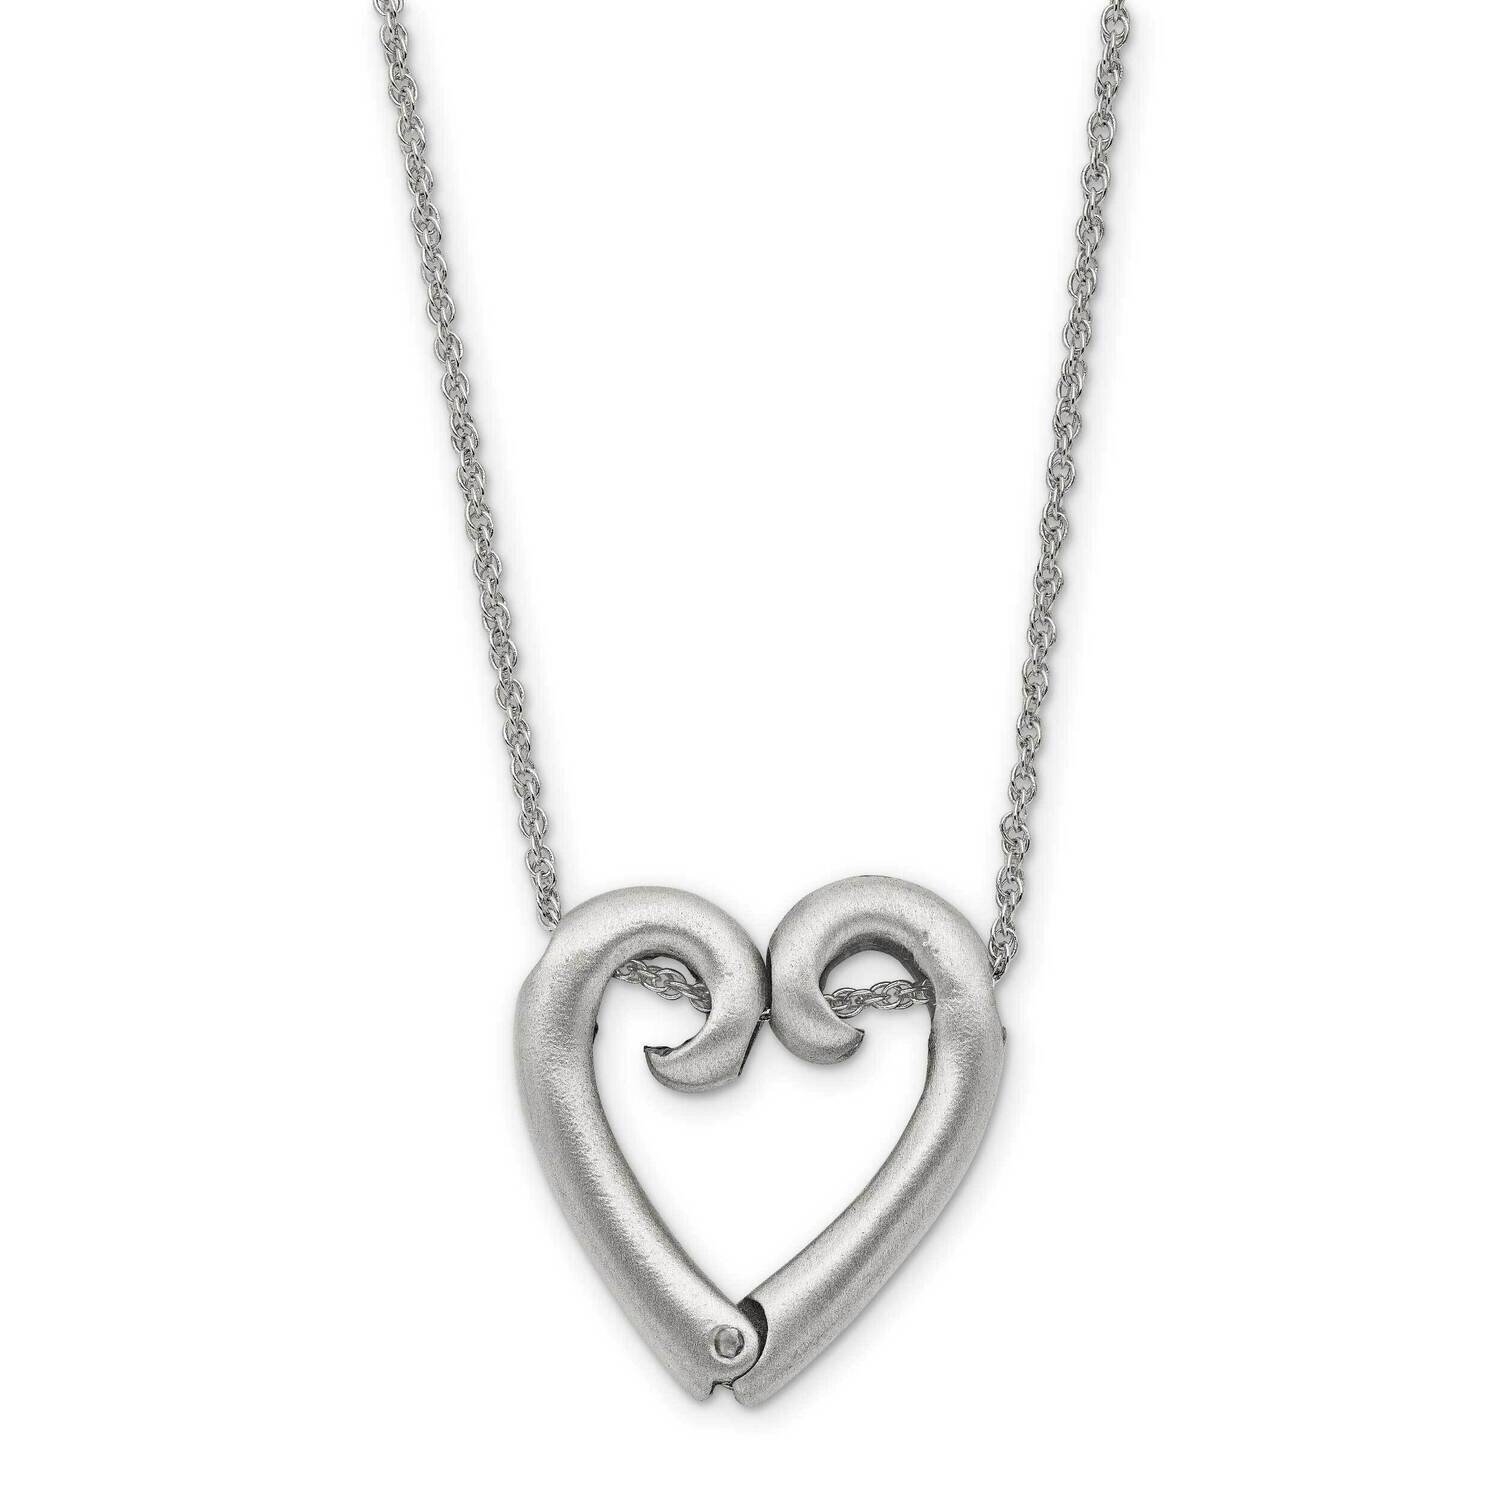 Hinged Heart Keepsake and Ring Holder 20 Inch Necklace Silver-tone GM18282